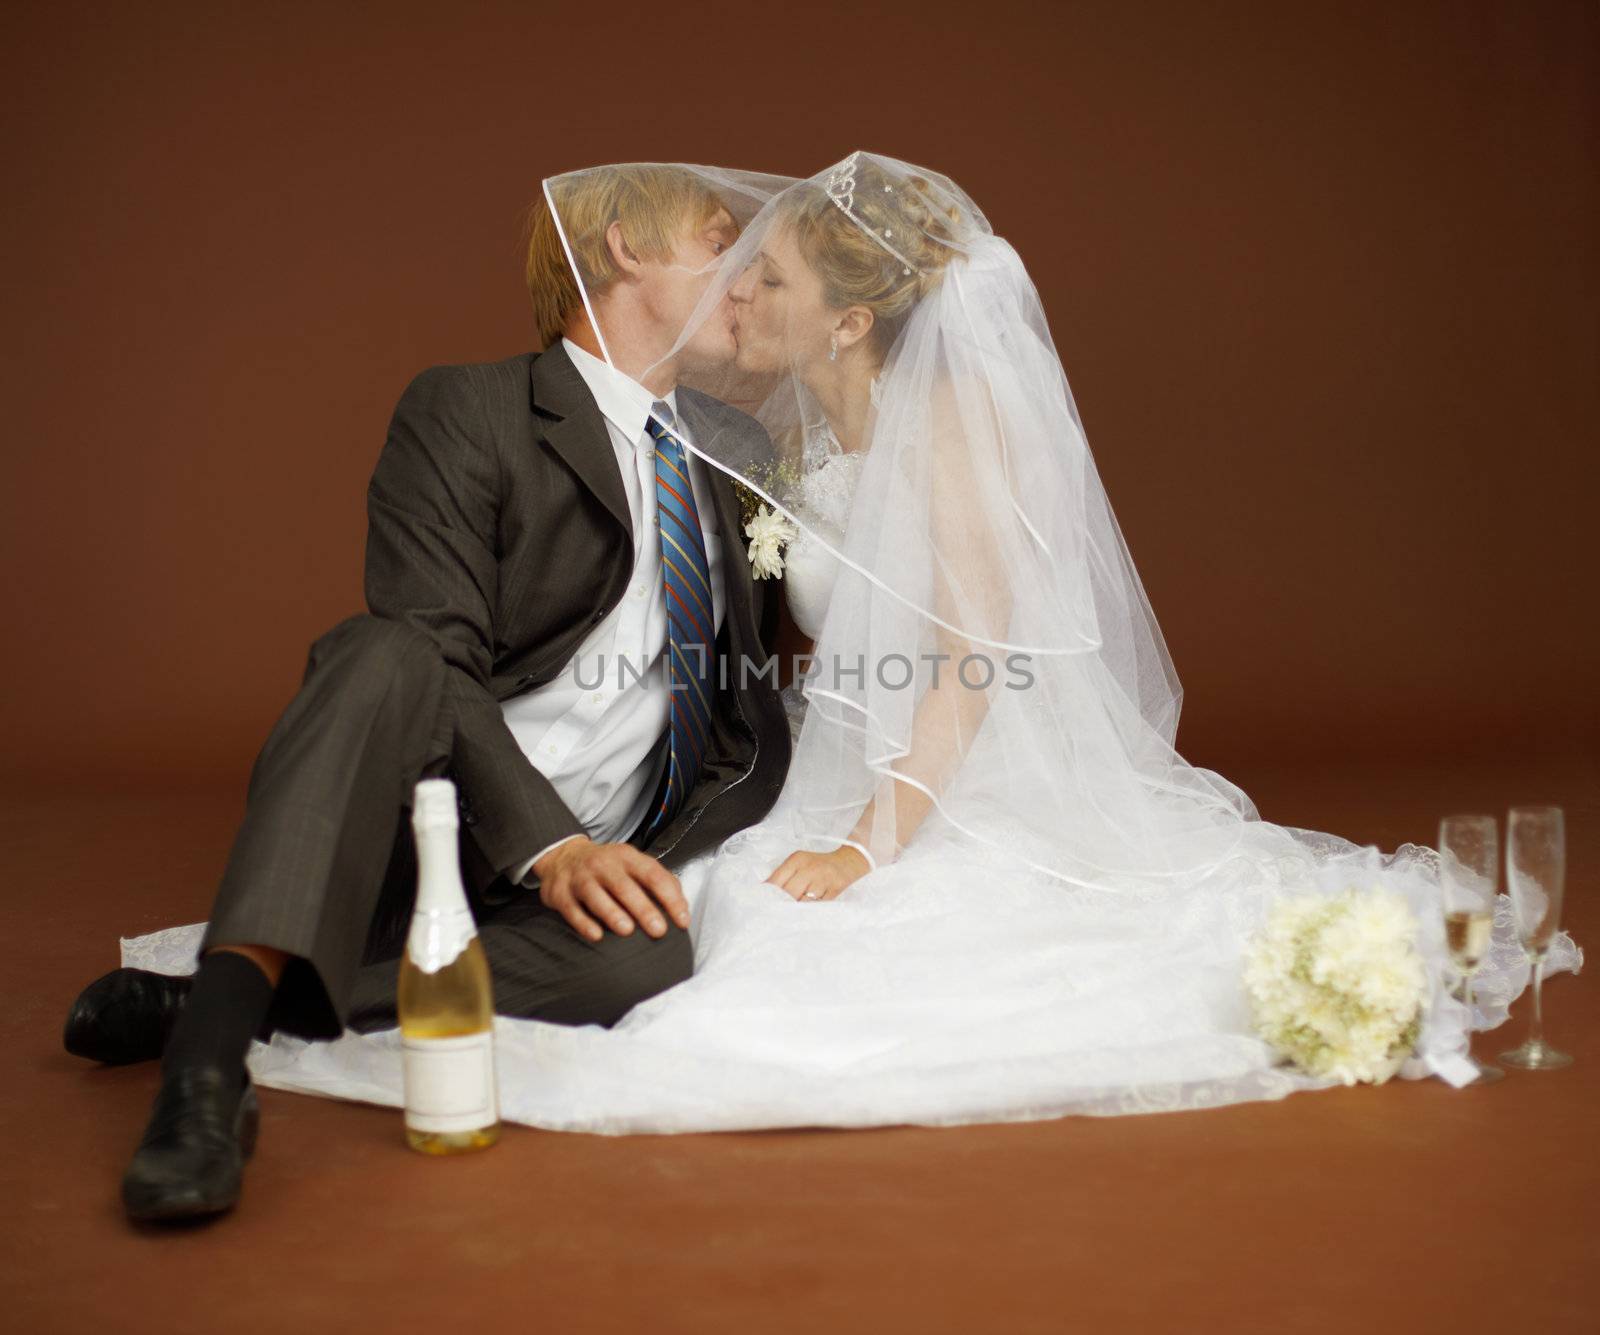 The bride and groom kissing and drinking champagne wine